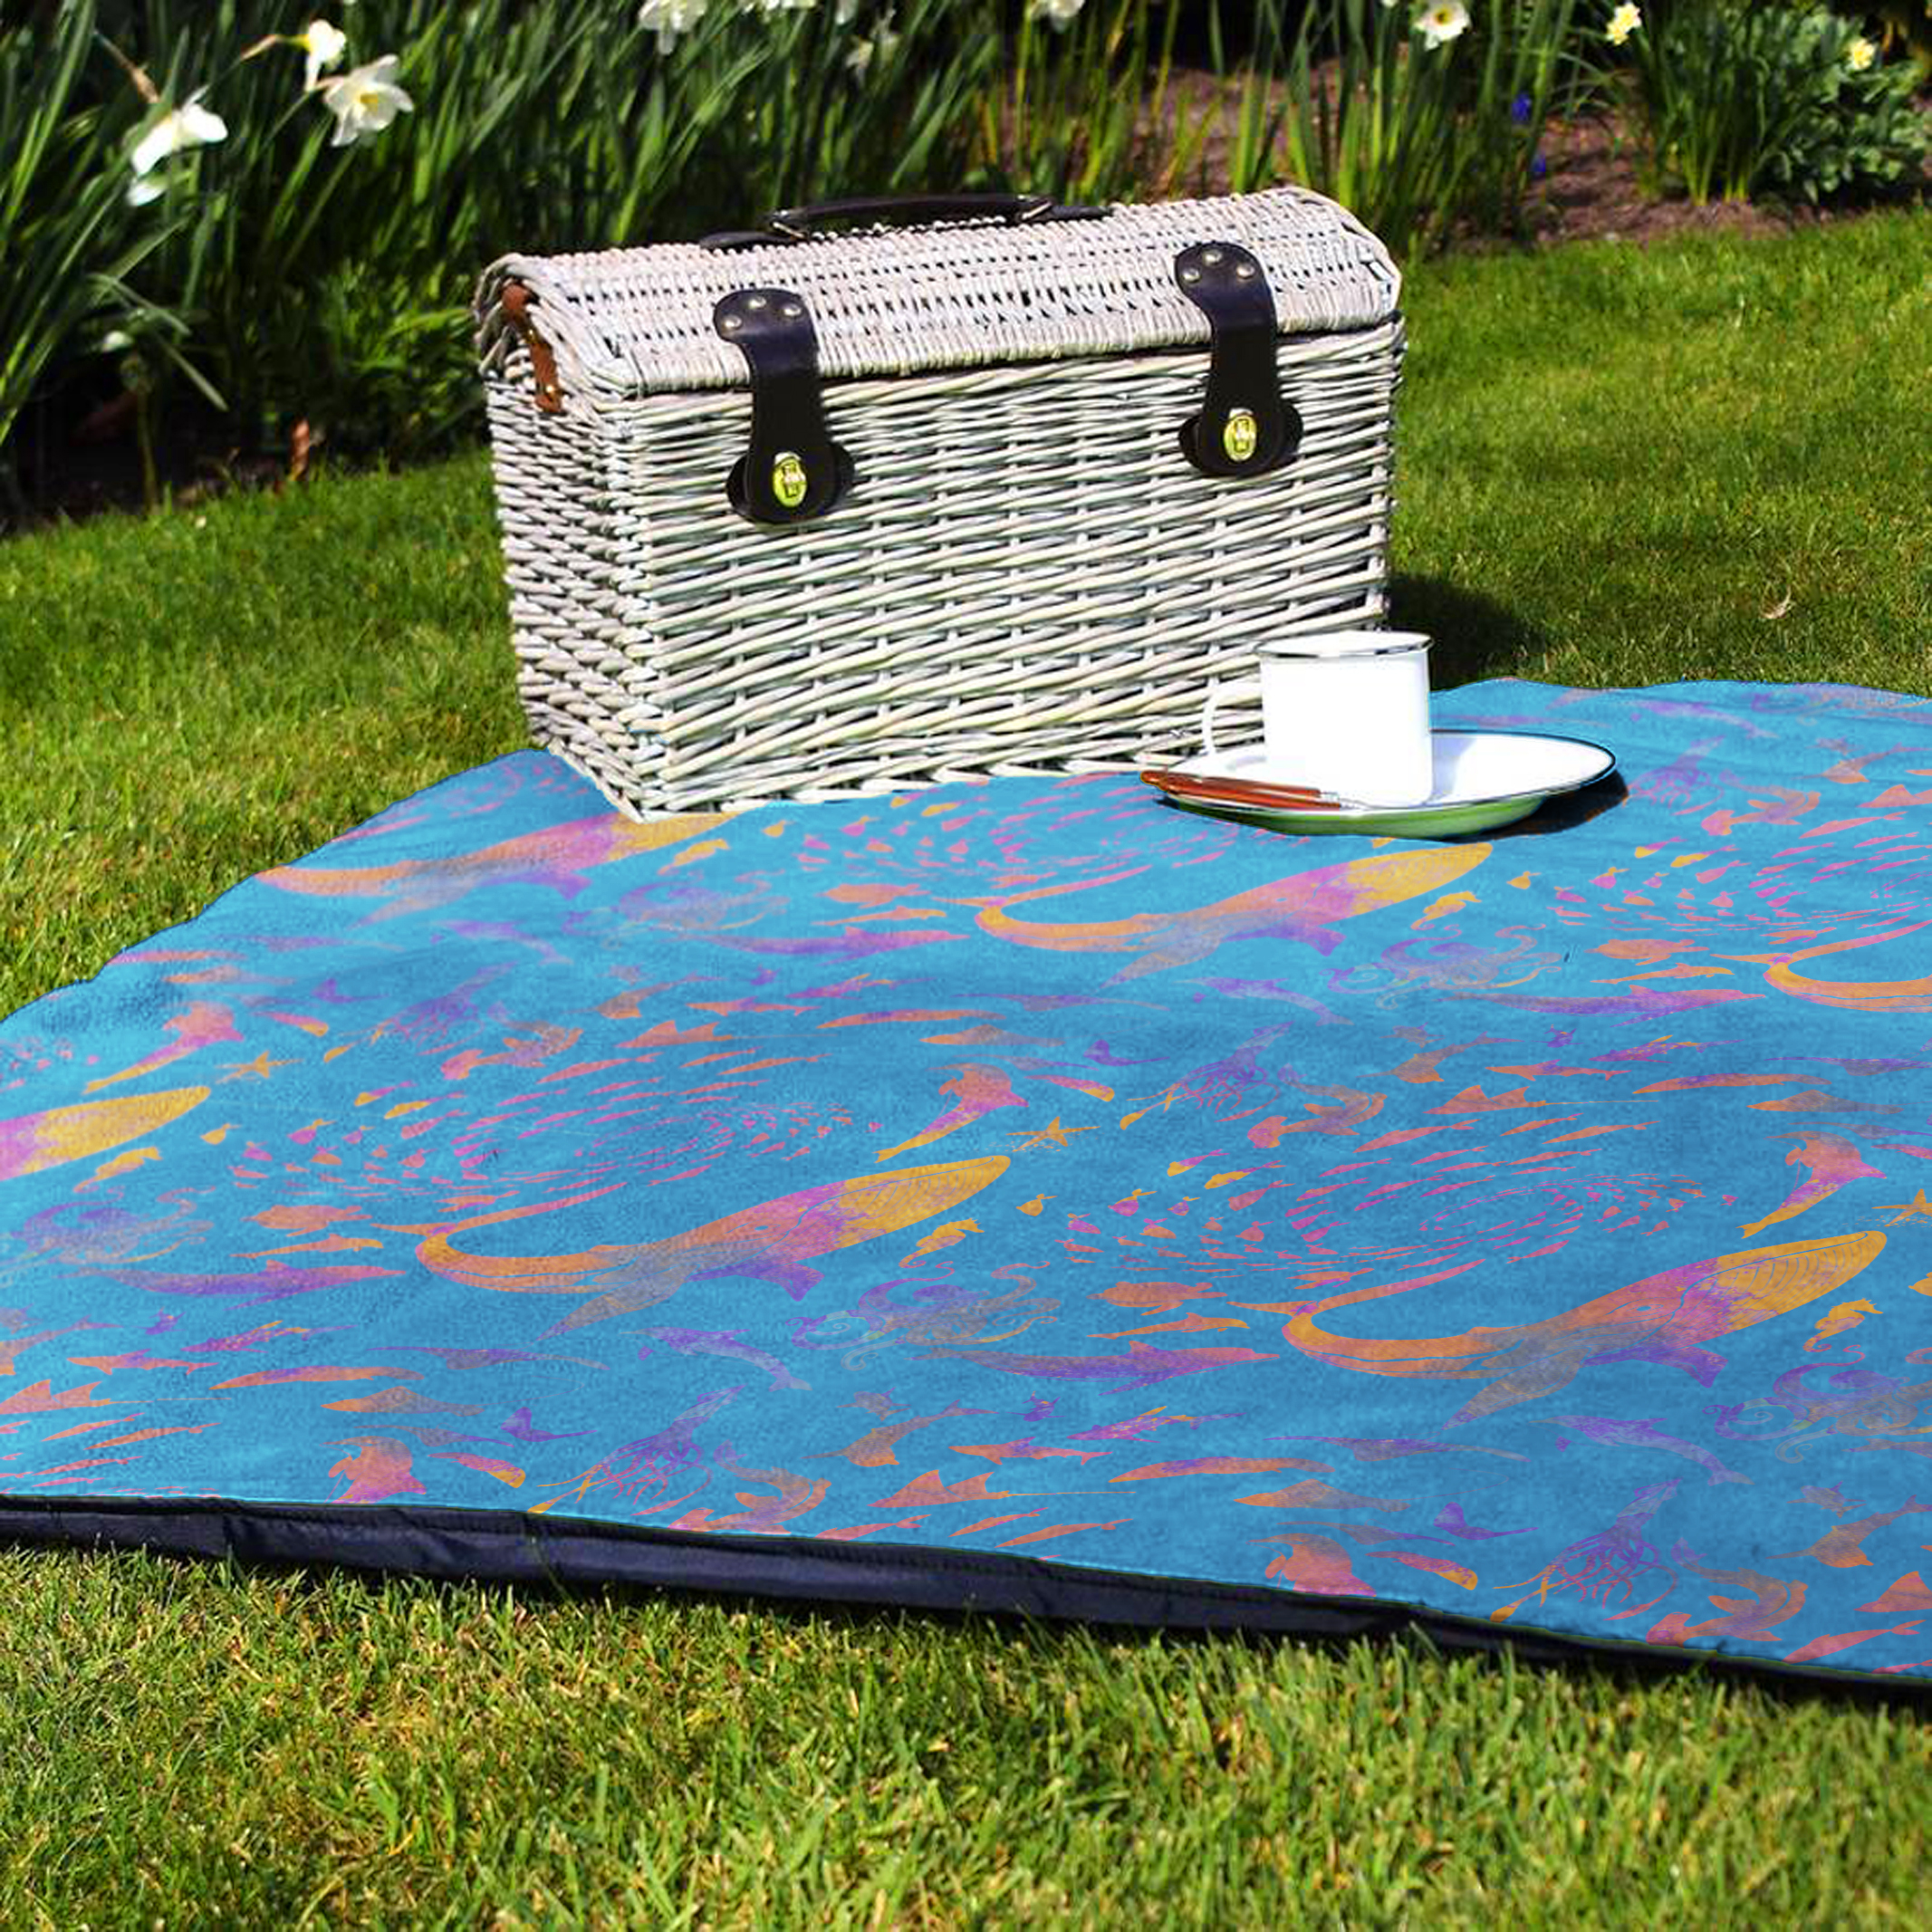 The Waters Picnic Blanket